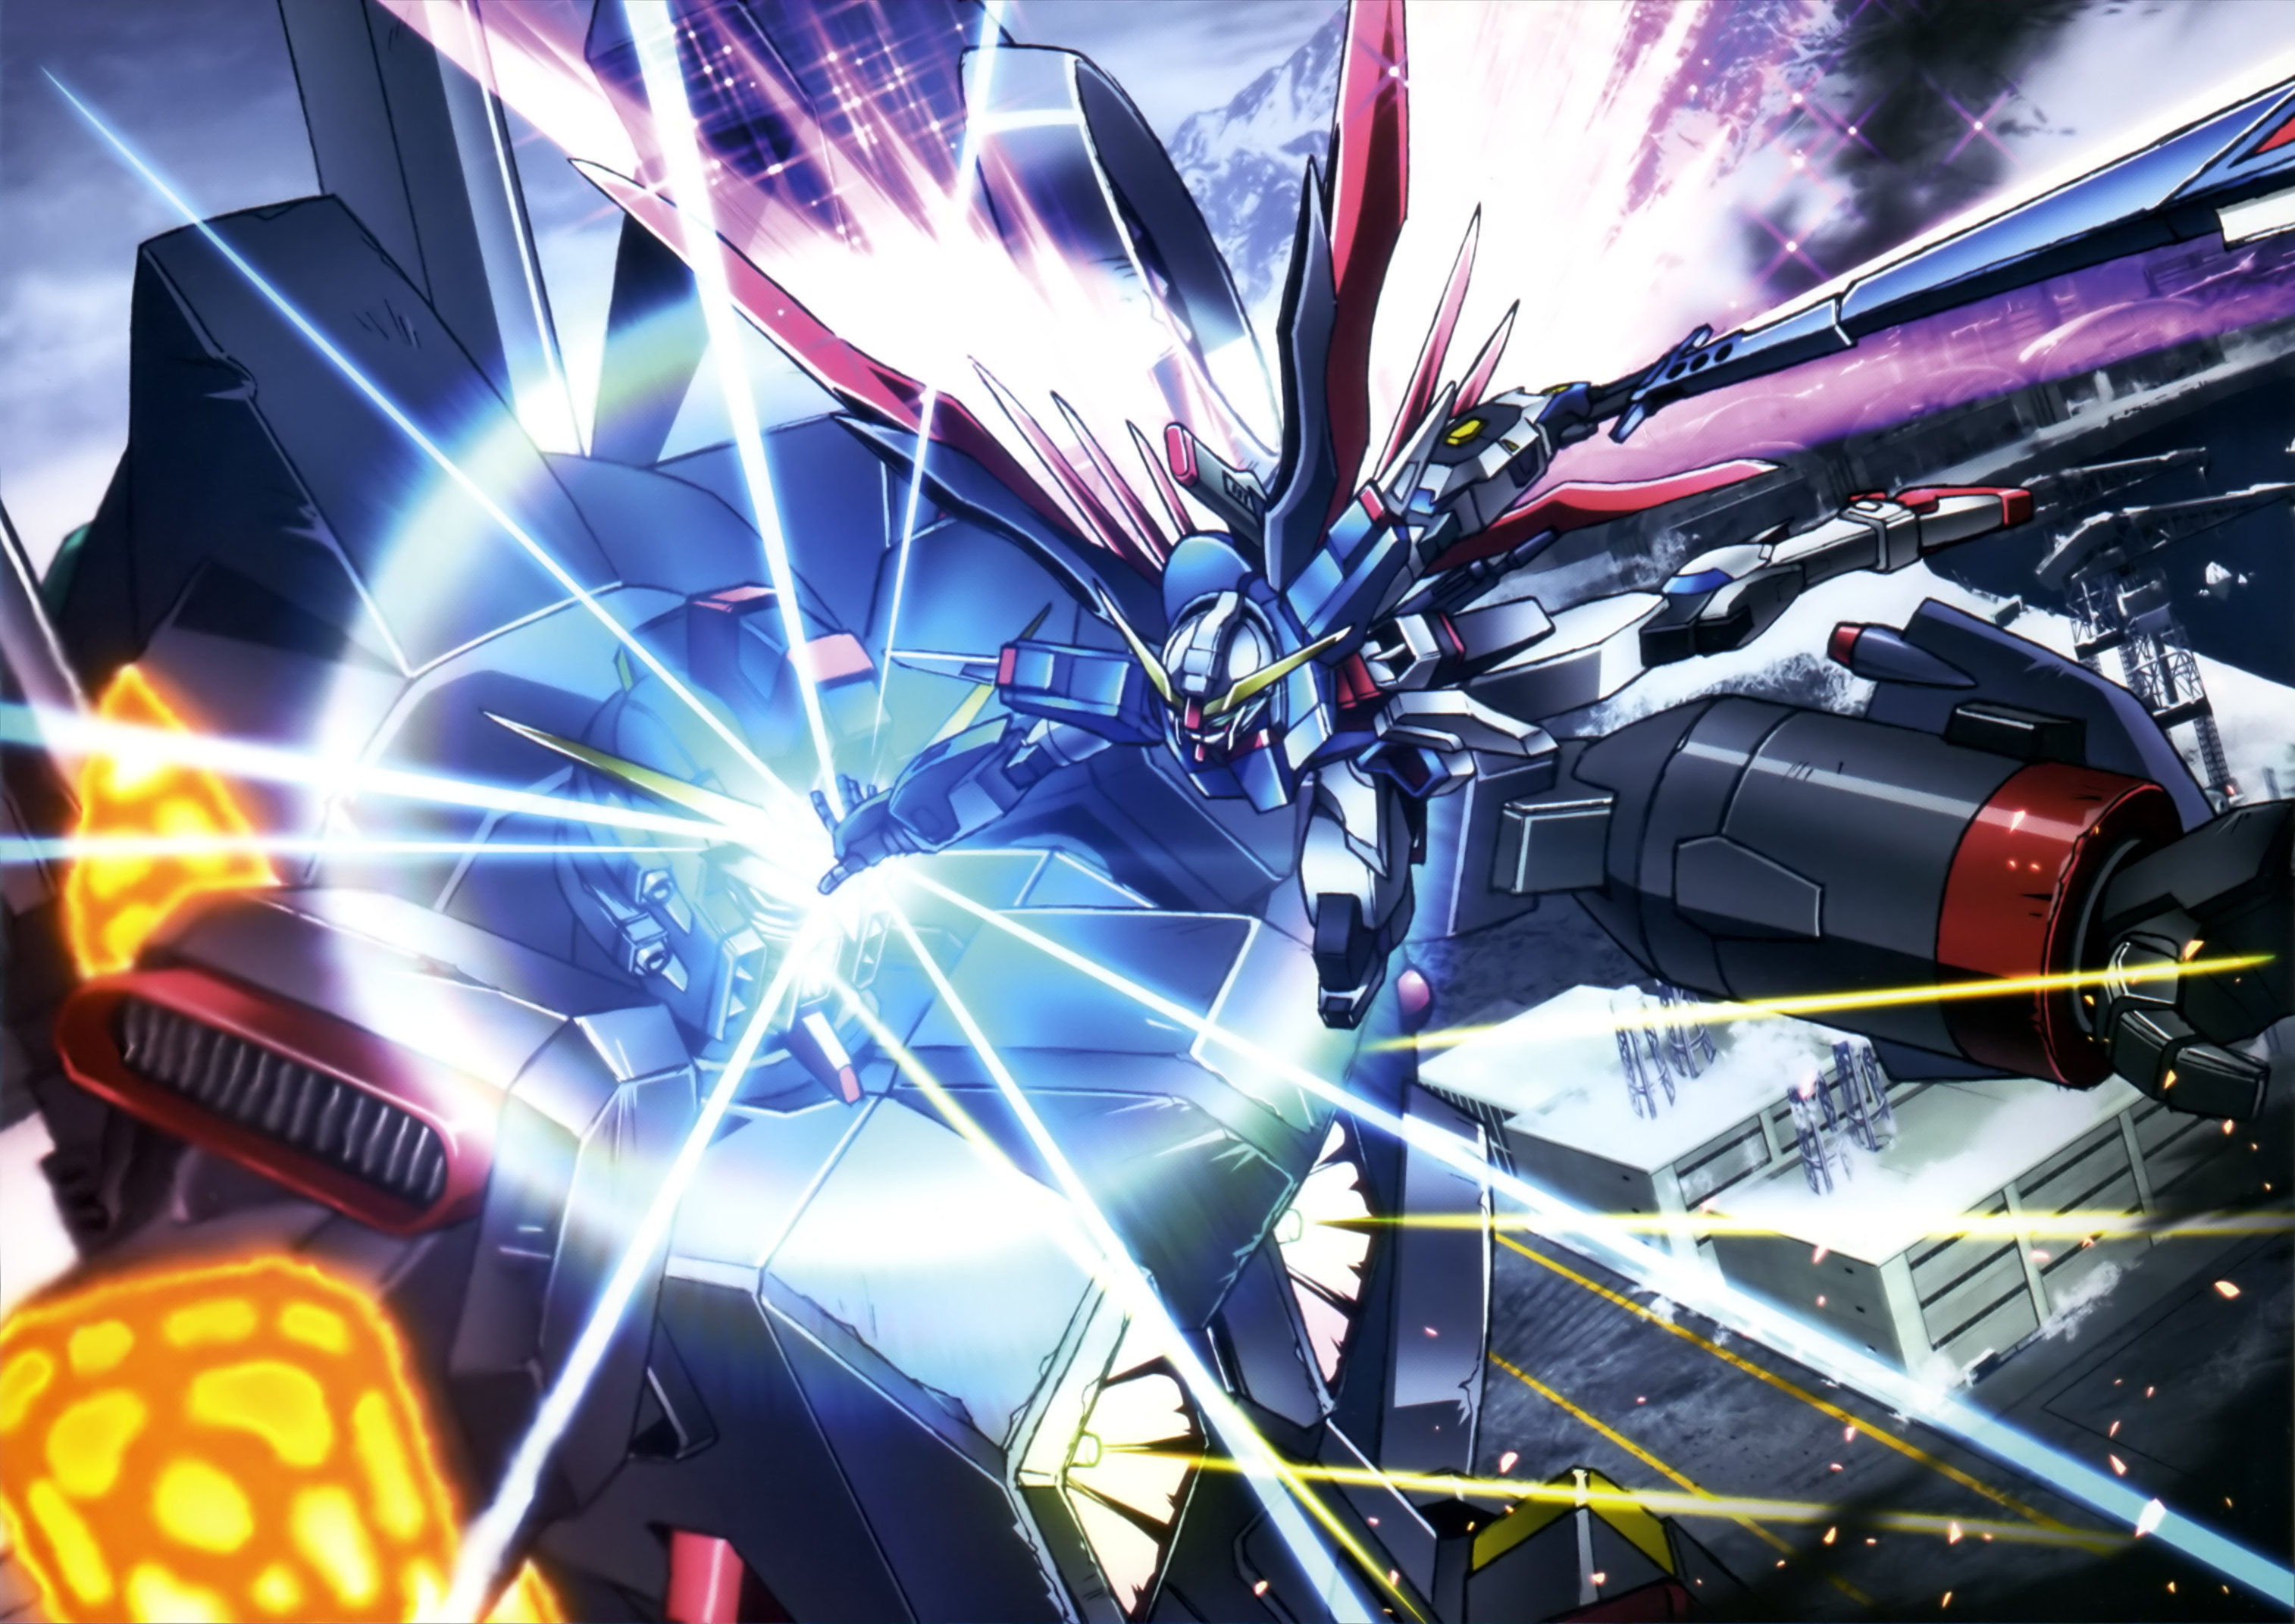 Mobile Suit Gundam Seed Destiny Hd Wallpaper Background Image 3028x2143 Id Wallpaper Abyss